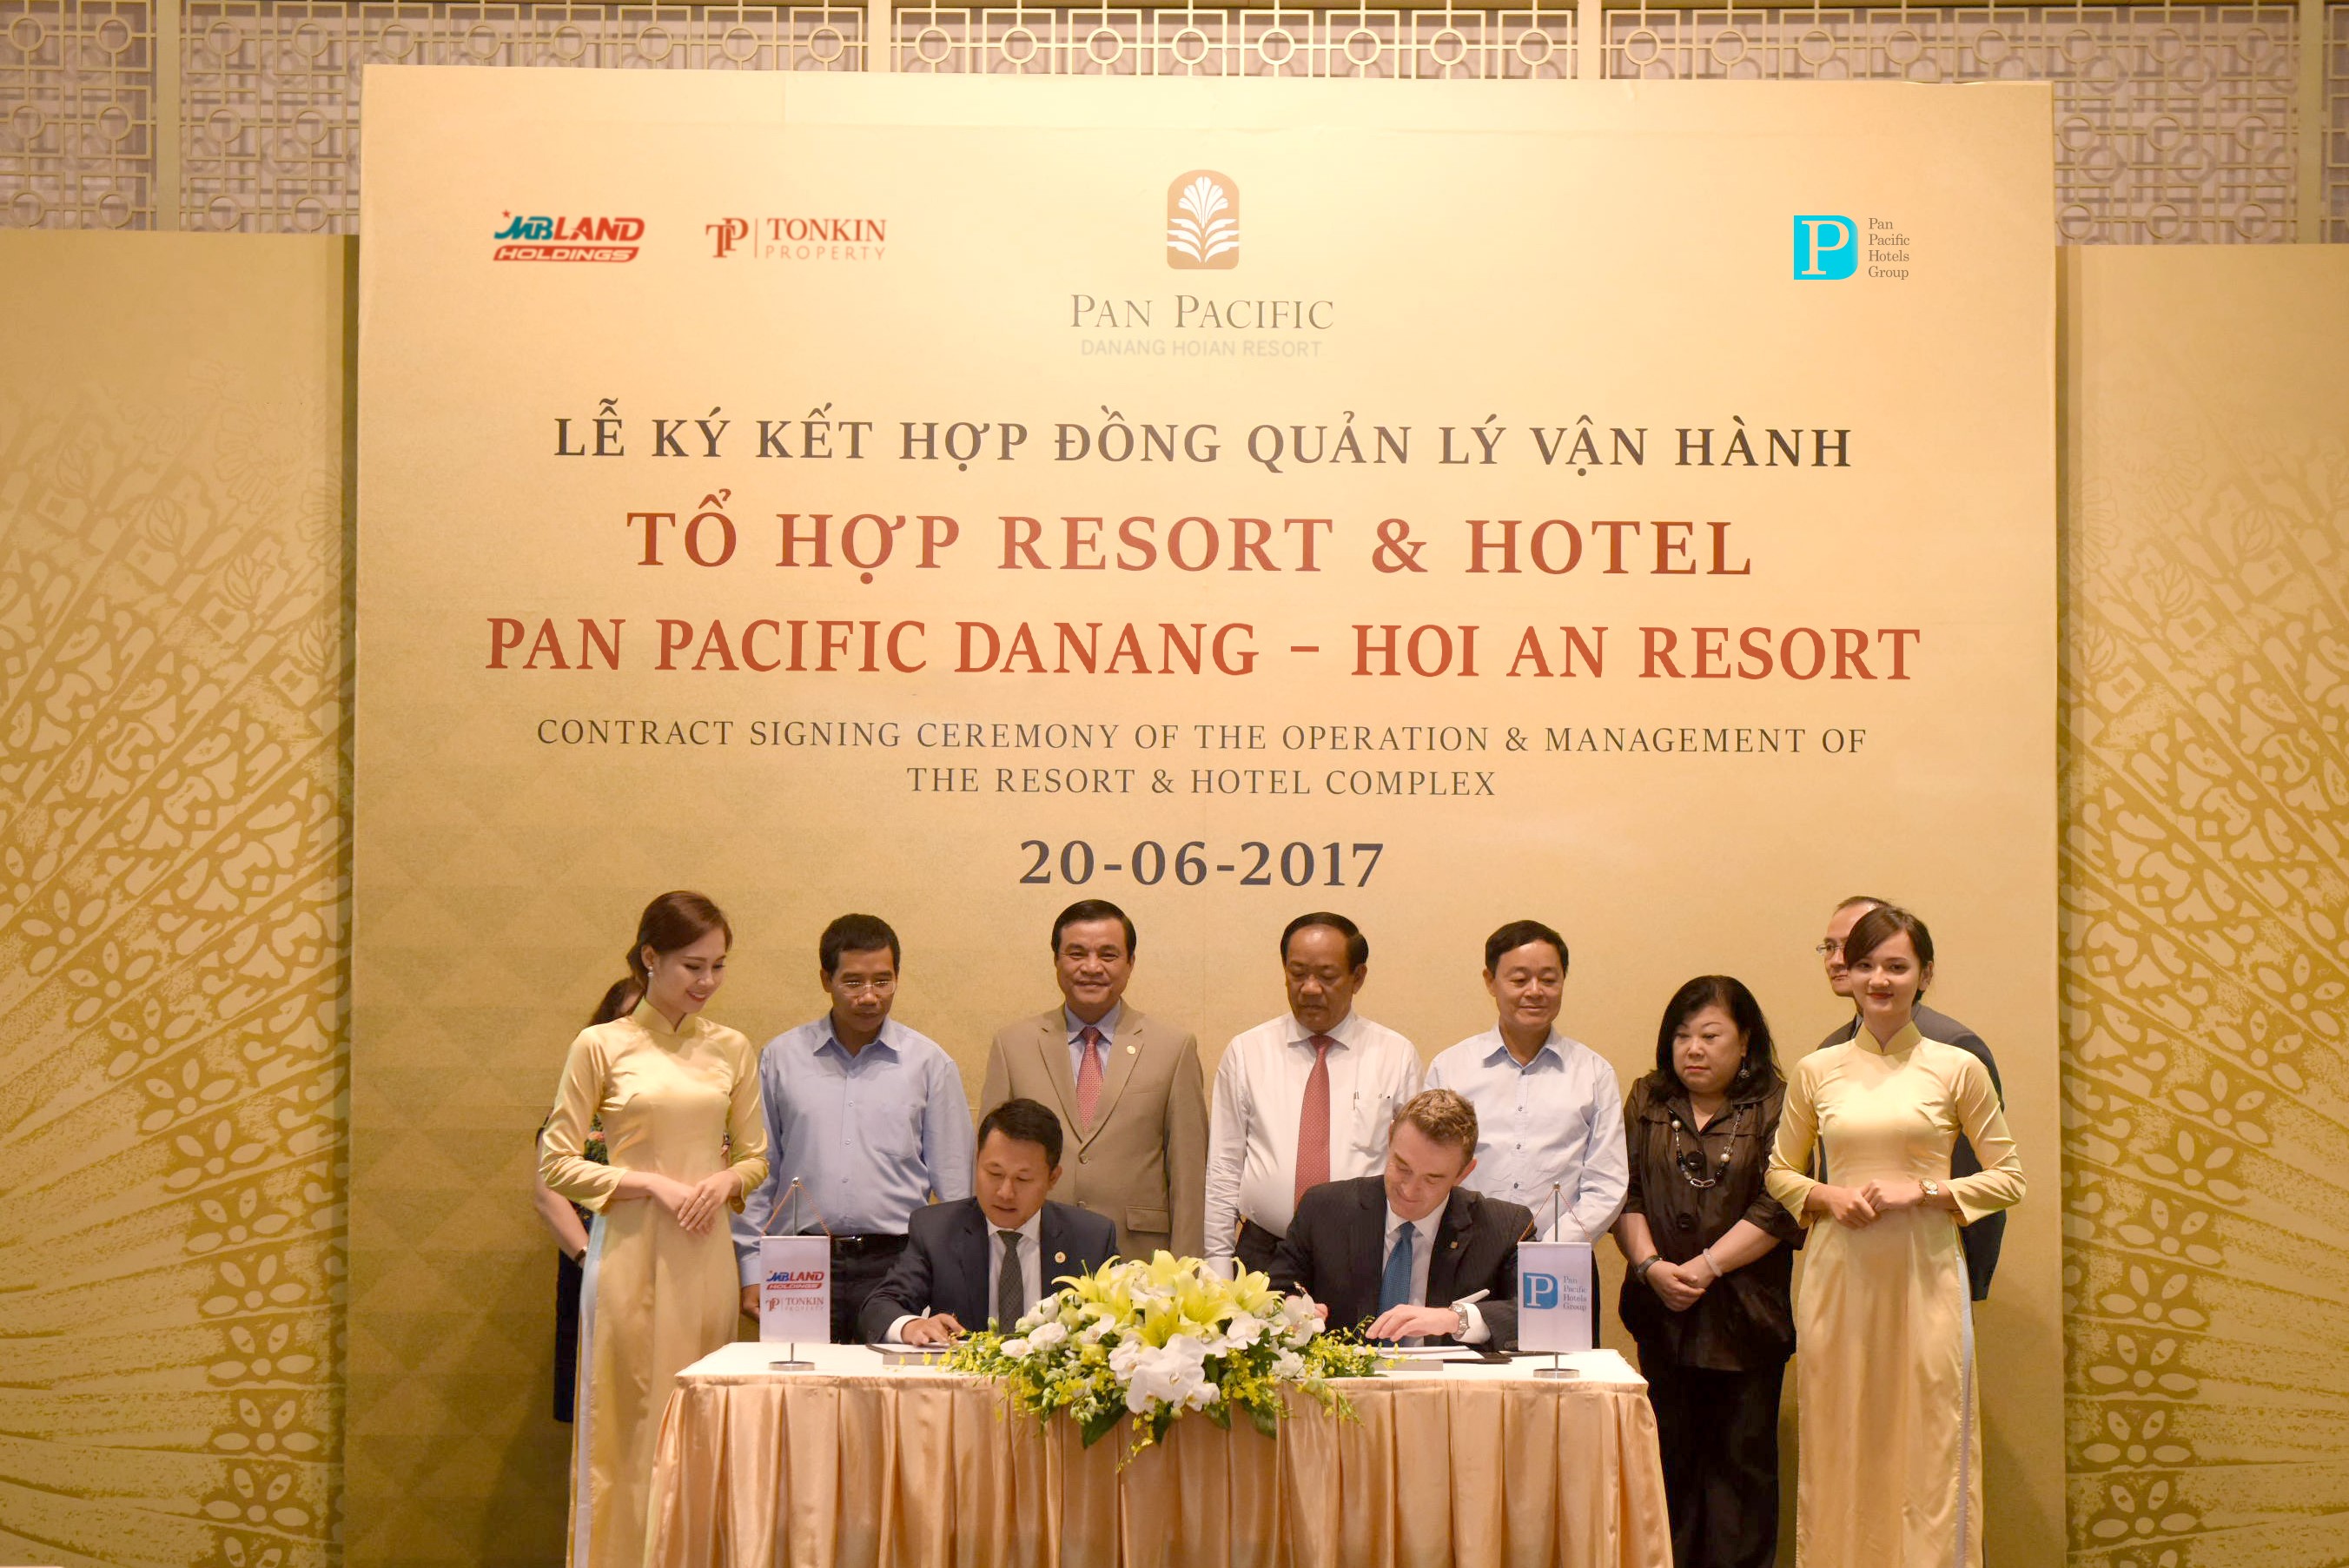 mbland pan pacific sign contract on operation management of pan pacific danang hoi an resort